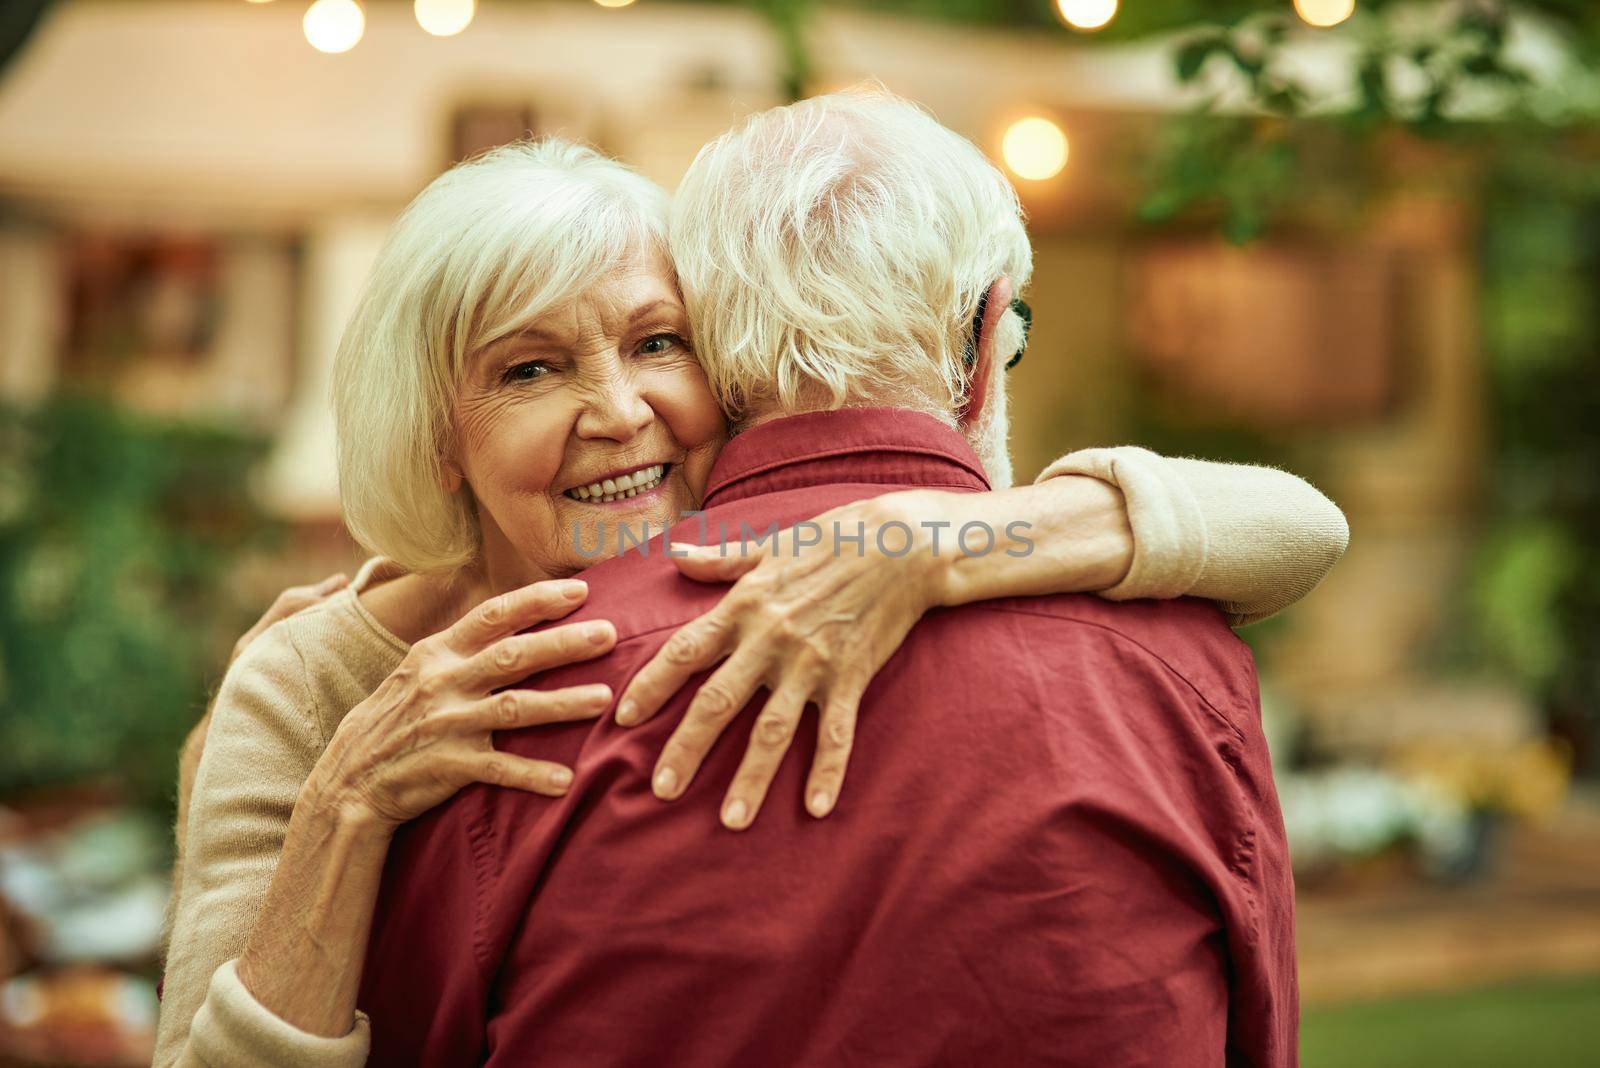 Elderly couple enjoying the evening while dancing by friendsstock